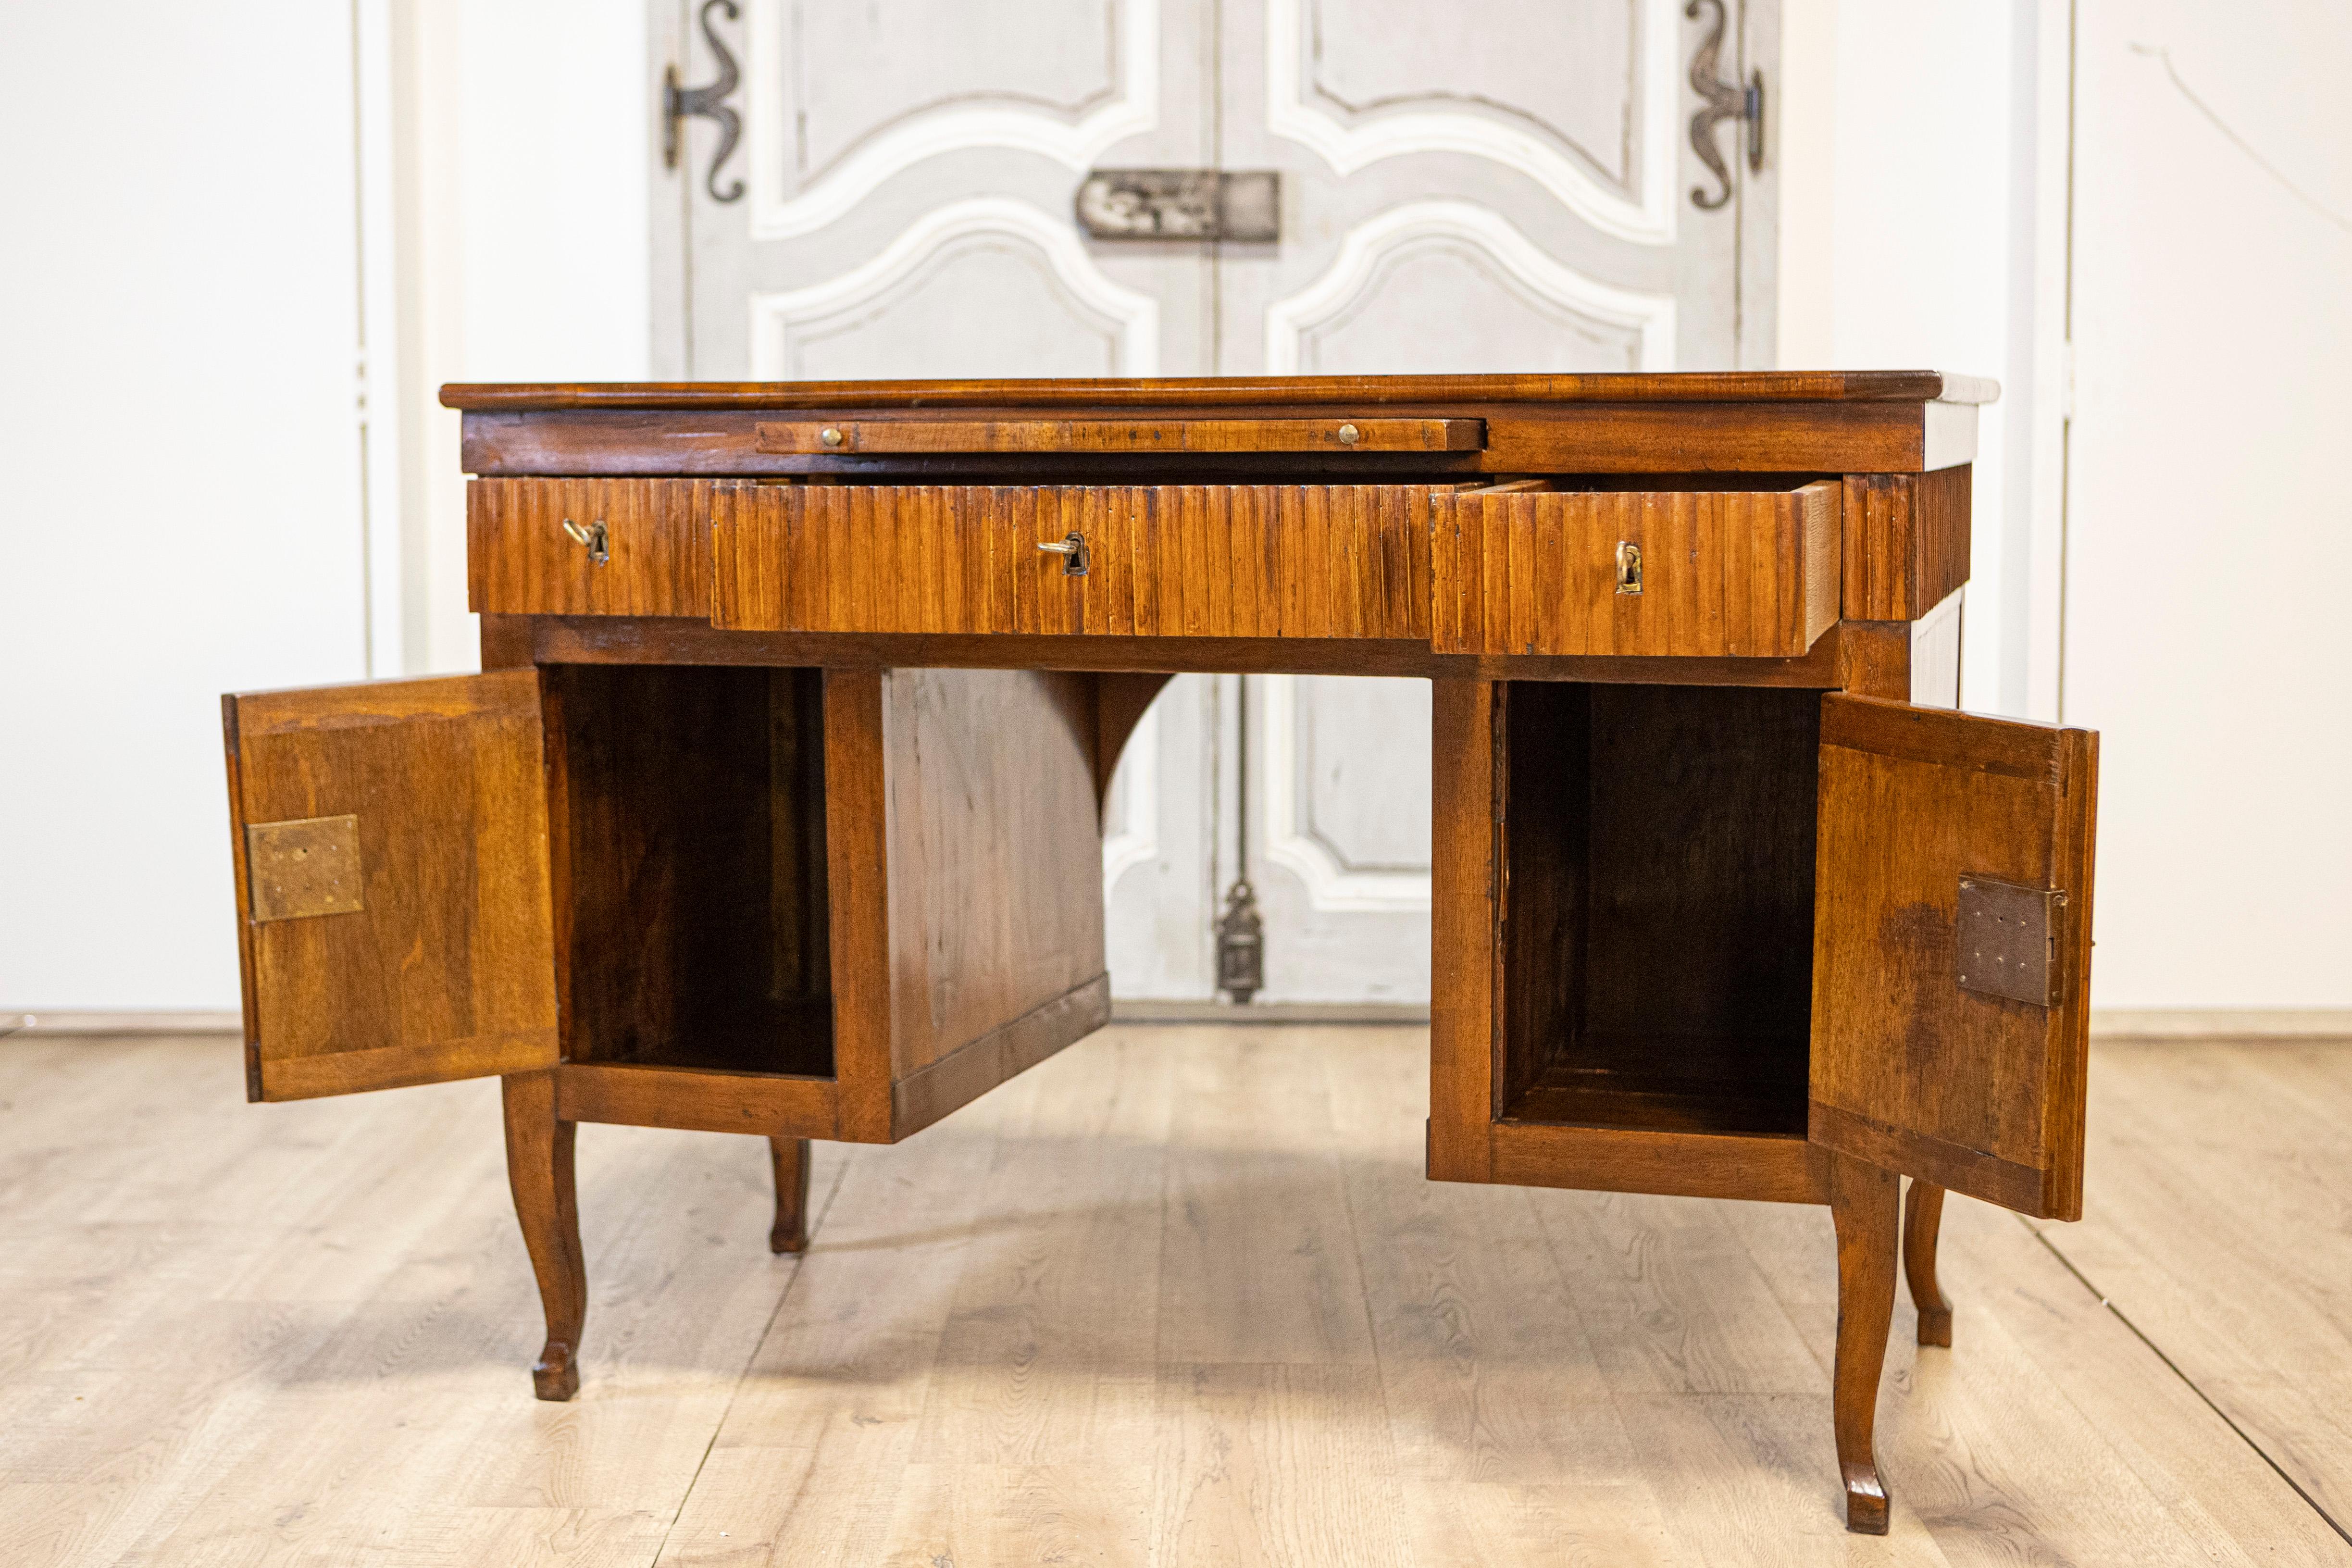 Italian 18th Century Walnut Desk with Carved Reeded Apron, Drawers and Doors For Sale 3